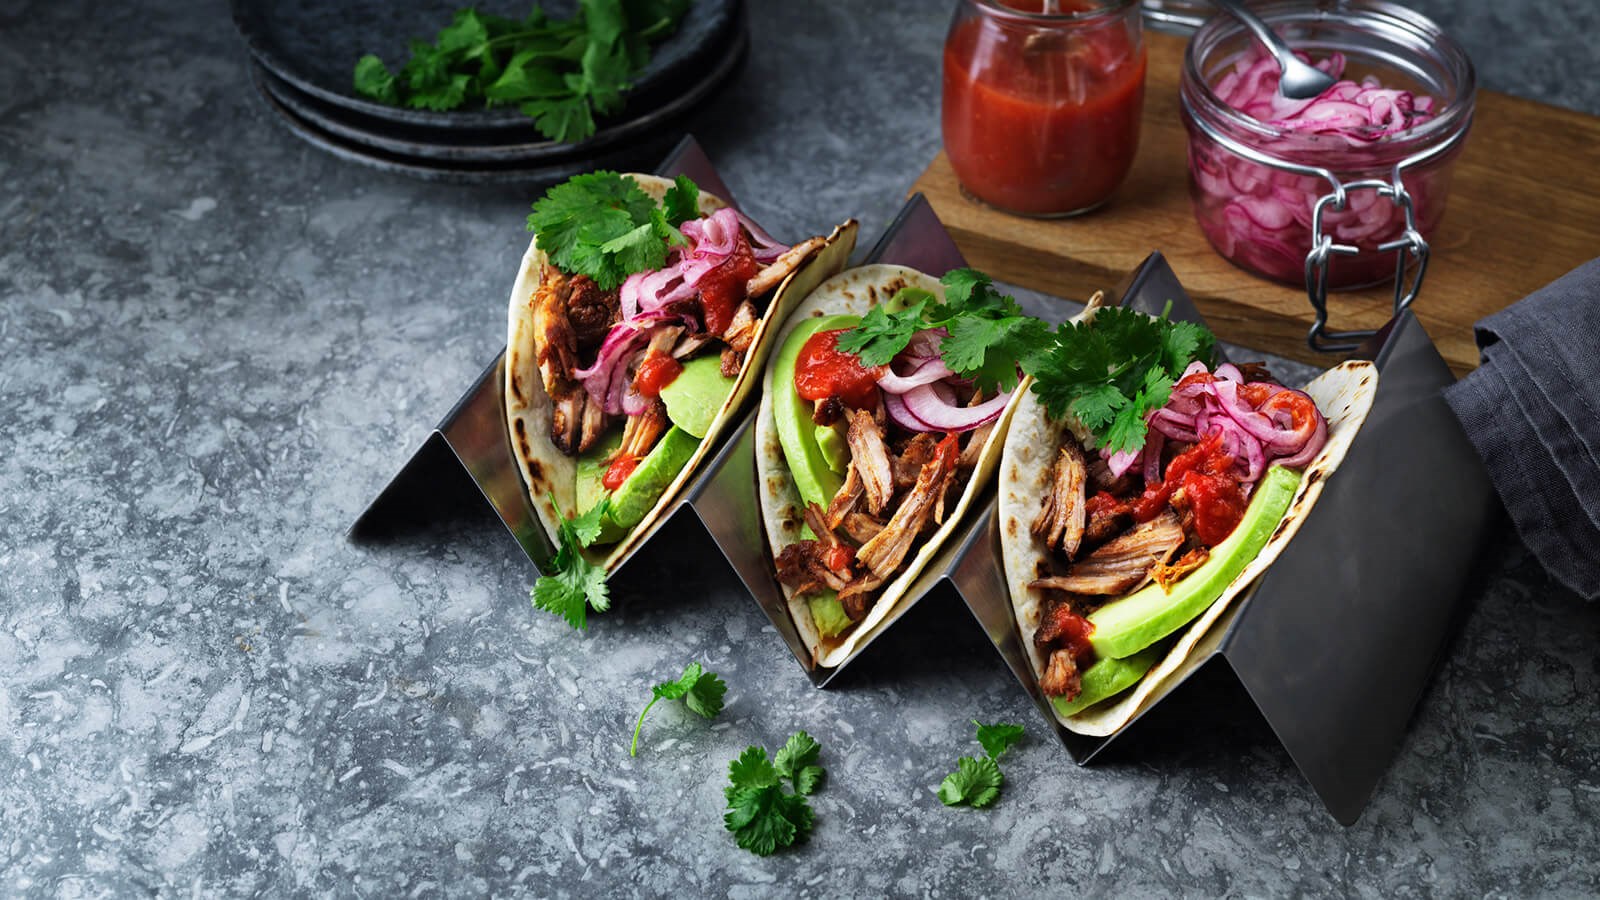 Three pulled pork tacos on a tray